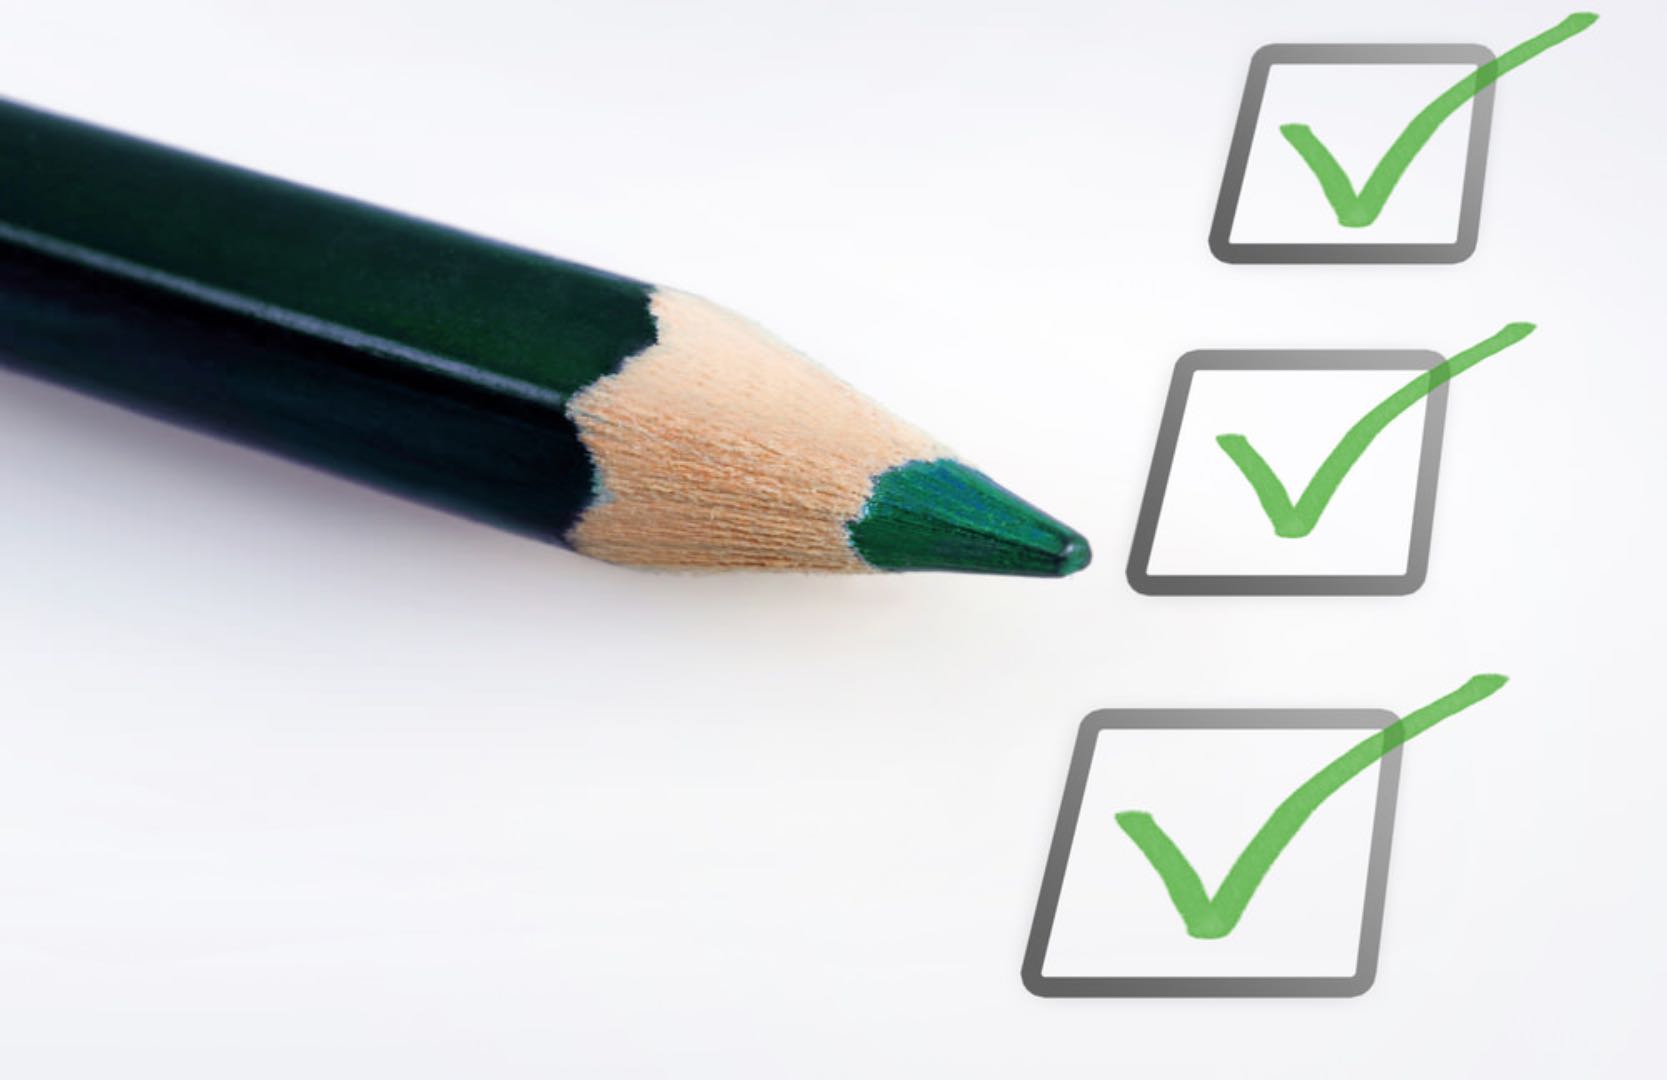 2021 seo content checklist for content writers